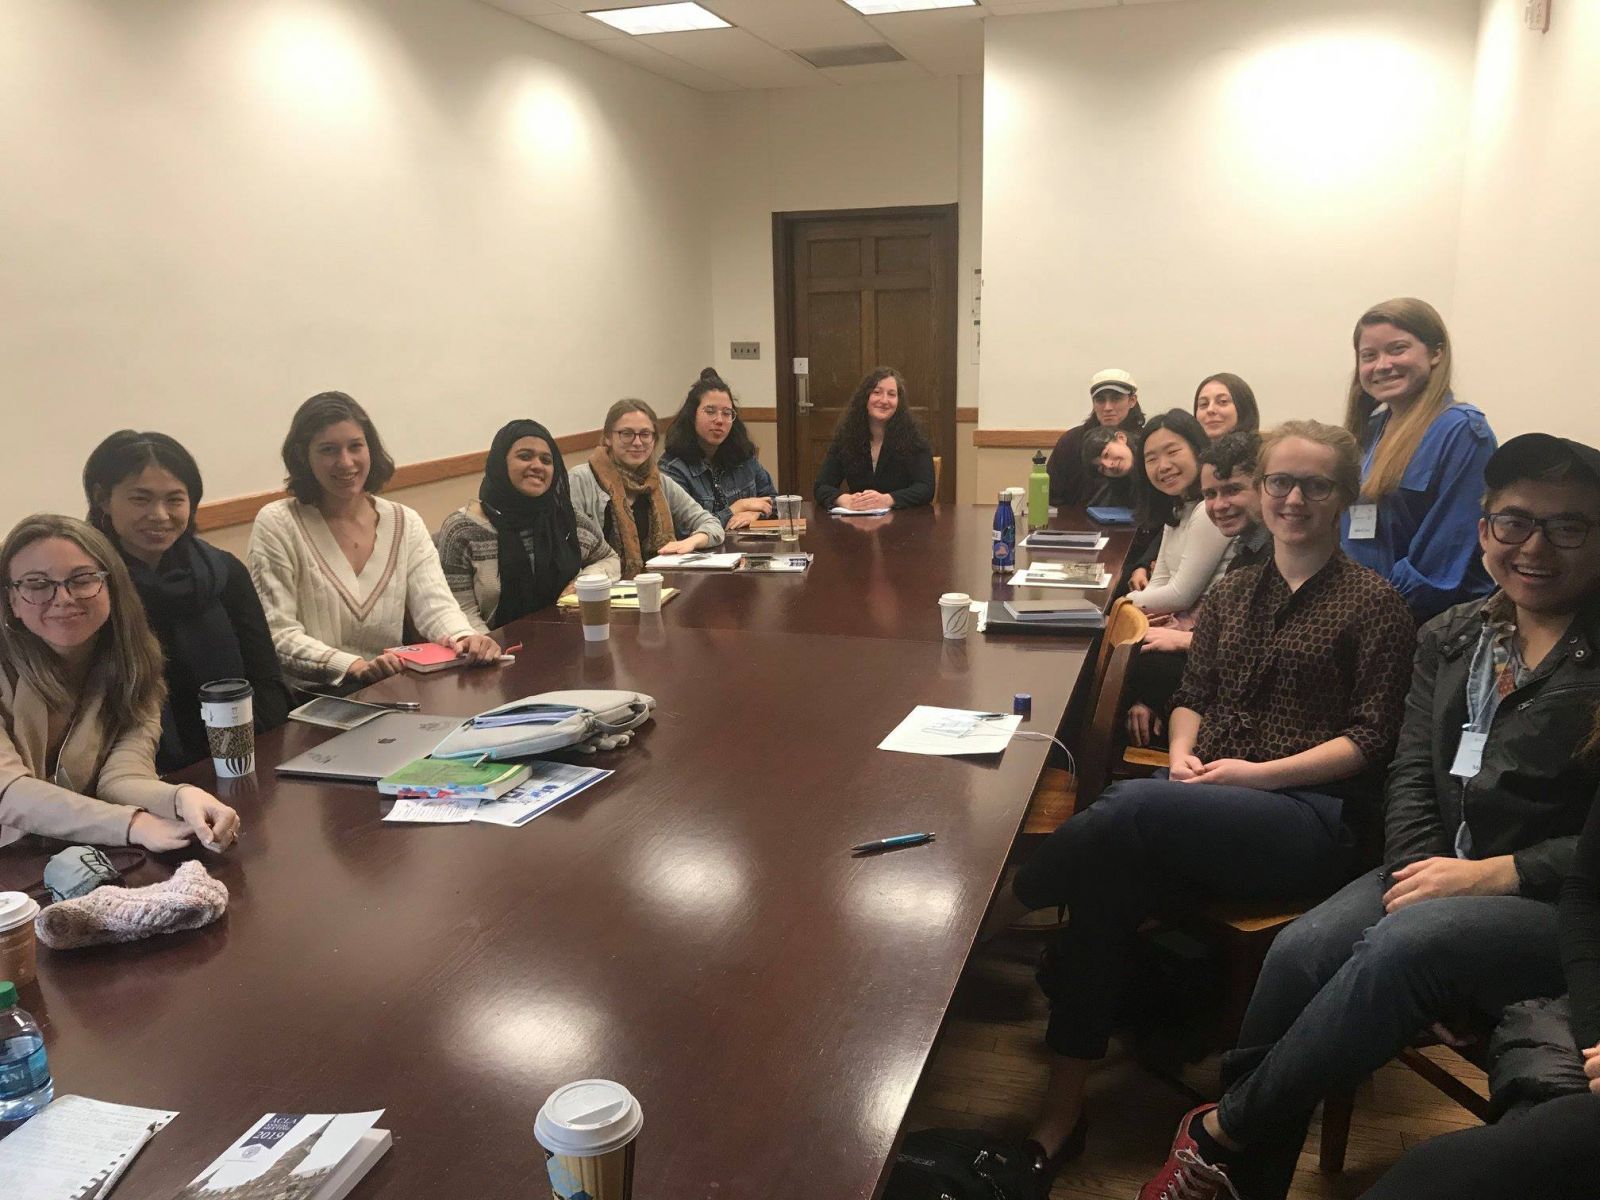 Students around a conference table at the ACLA 2019 Annual Meeting.